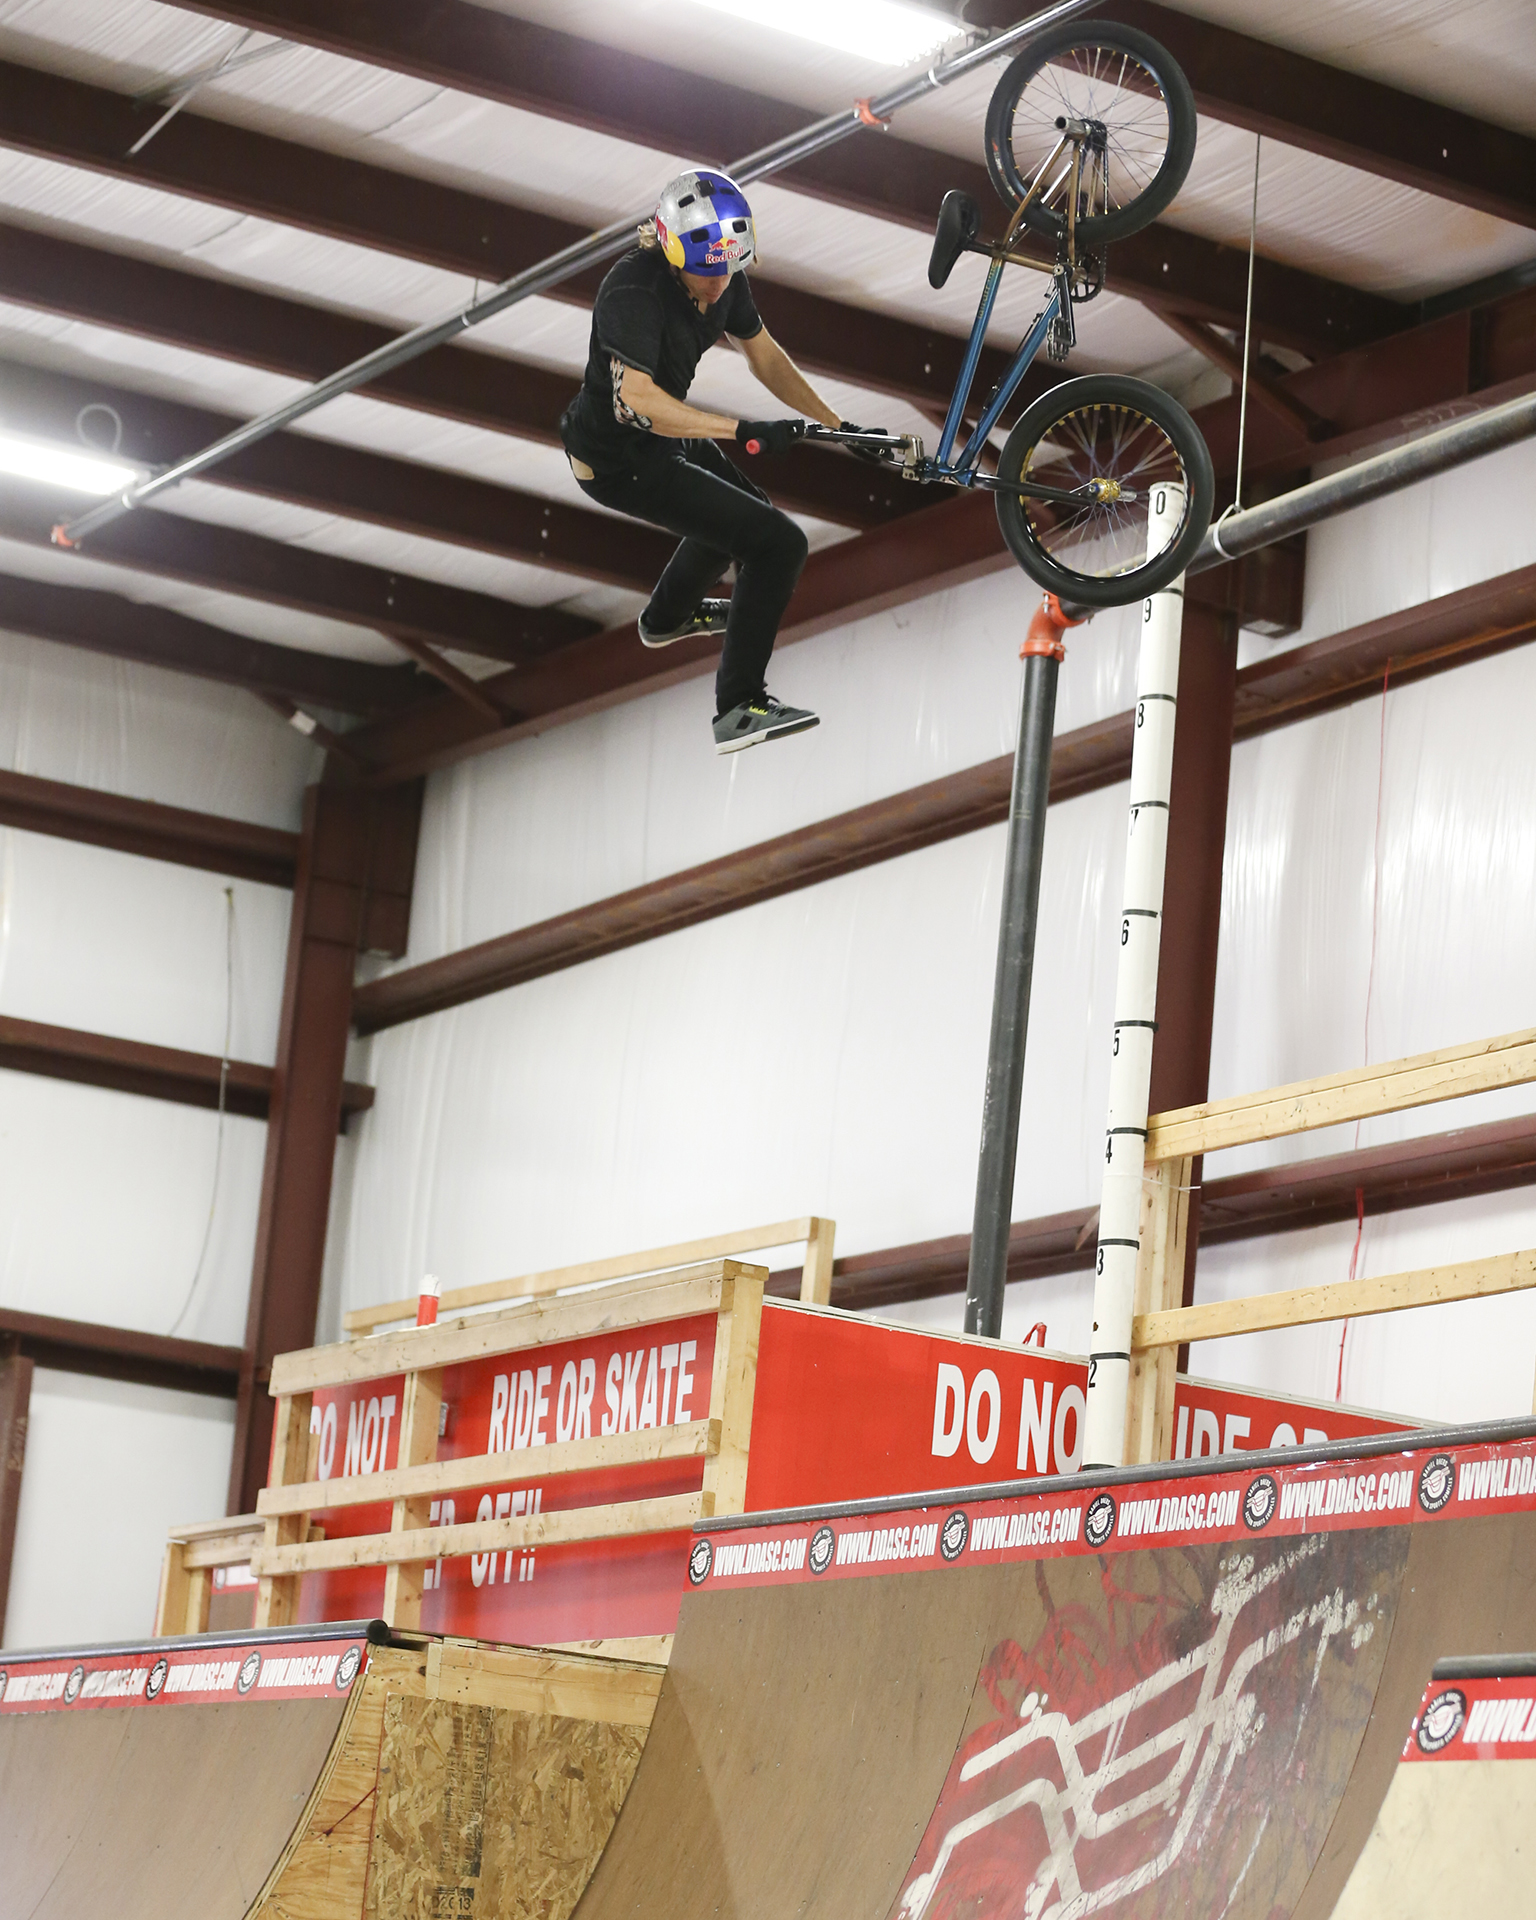 Tailwhip at height